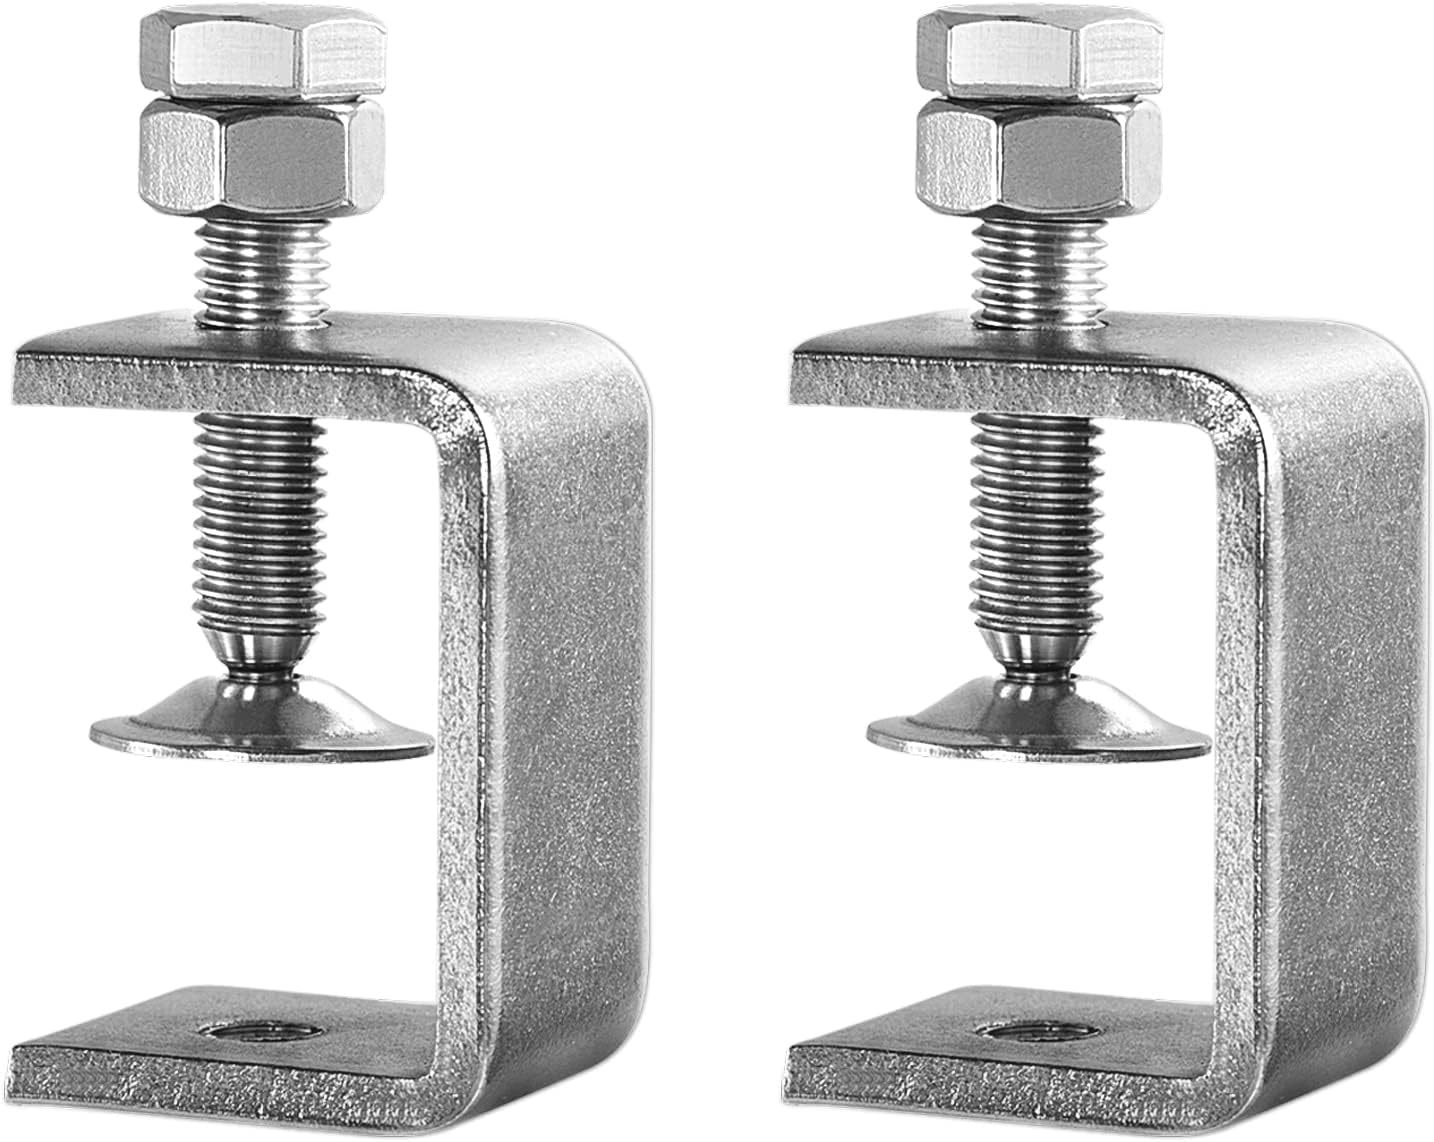 MVMVA C Clamps Heavy Duty - Stainless Steel C Clamp for Crafts